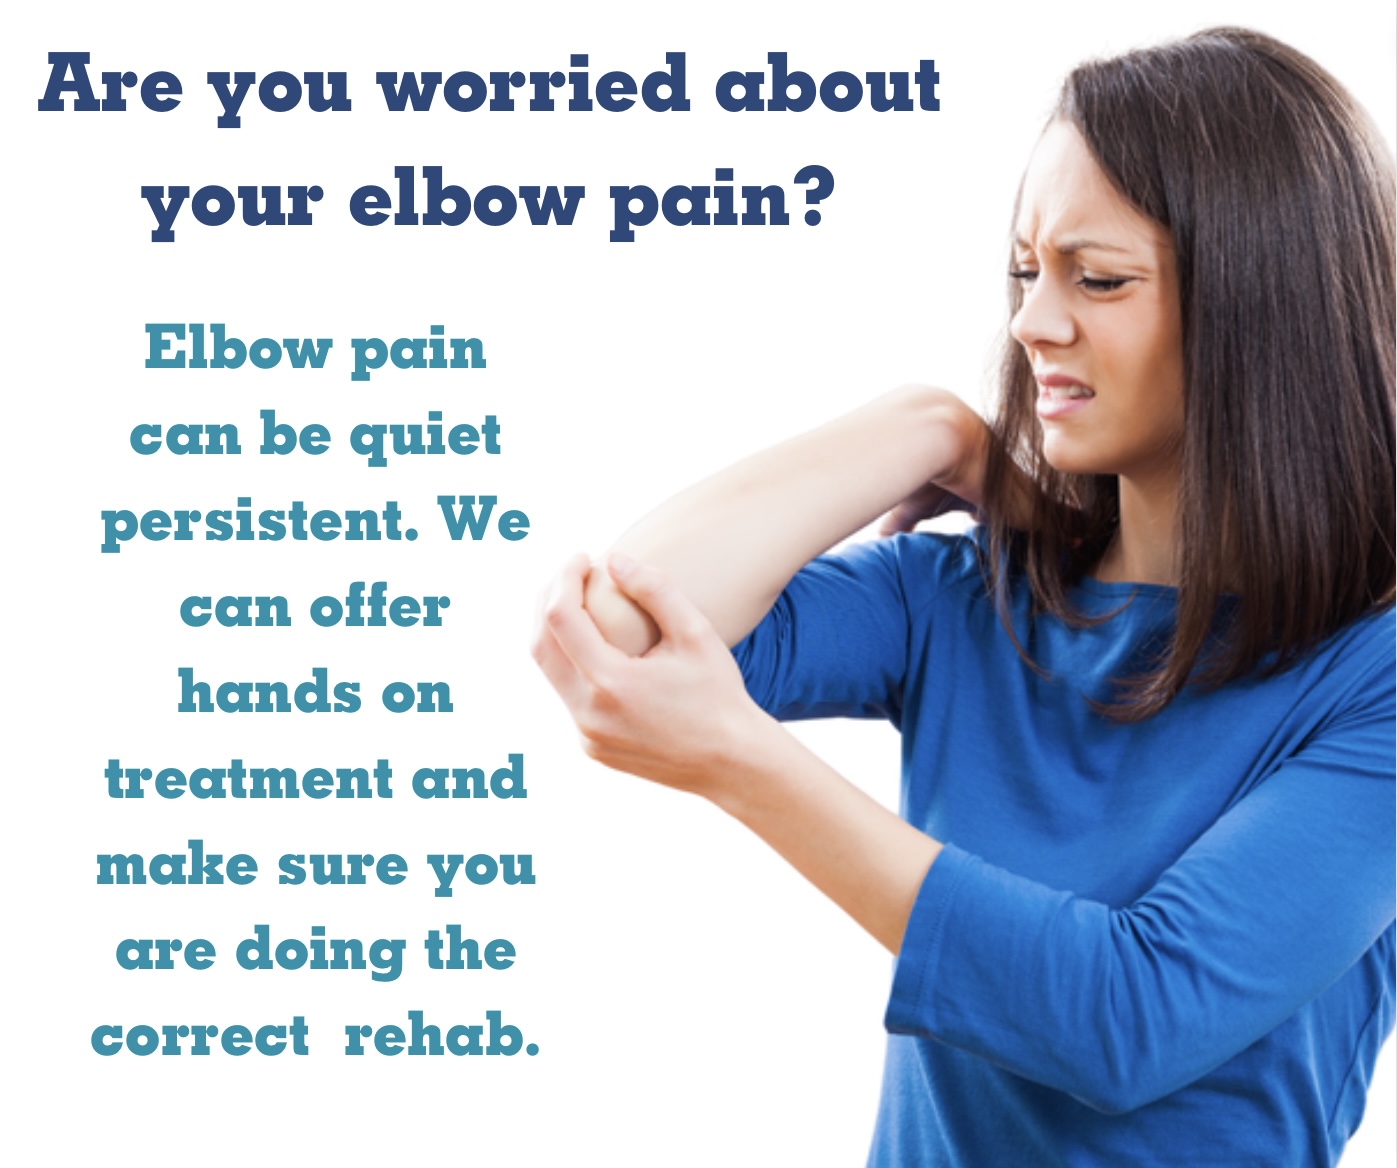 Lady cradling her elbow. Caption reads - Are you worried about your elbow. Elbow pain can be persistent. We offer hands on treatment and make sure you are doing the correct rehab.